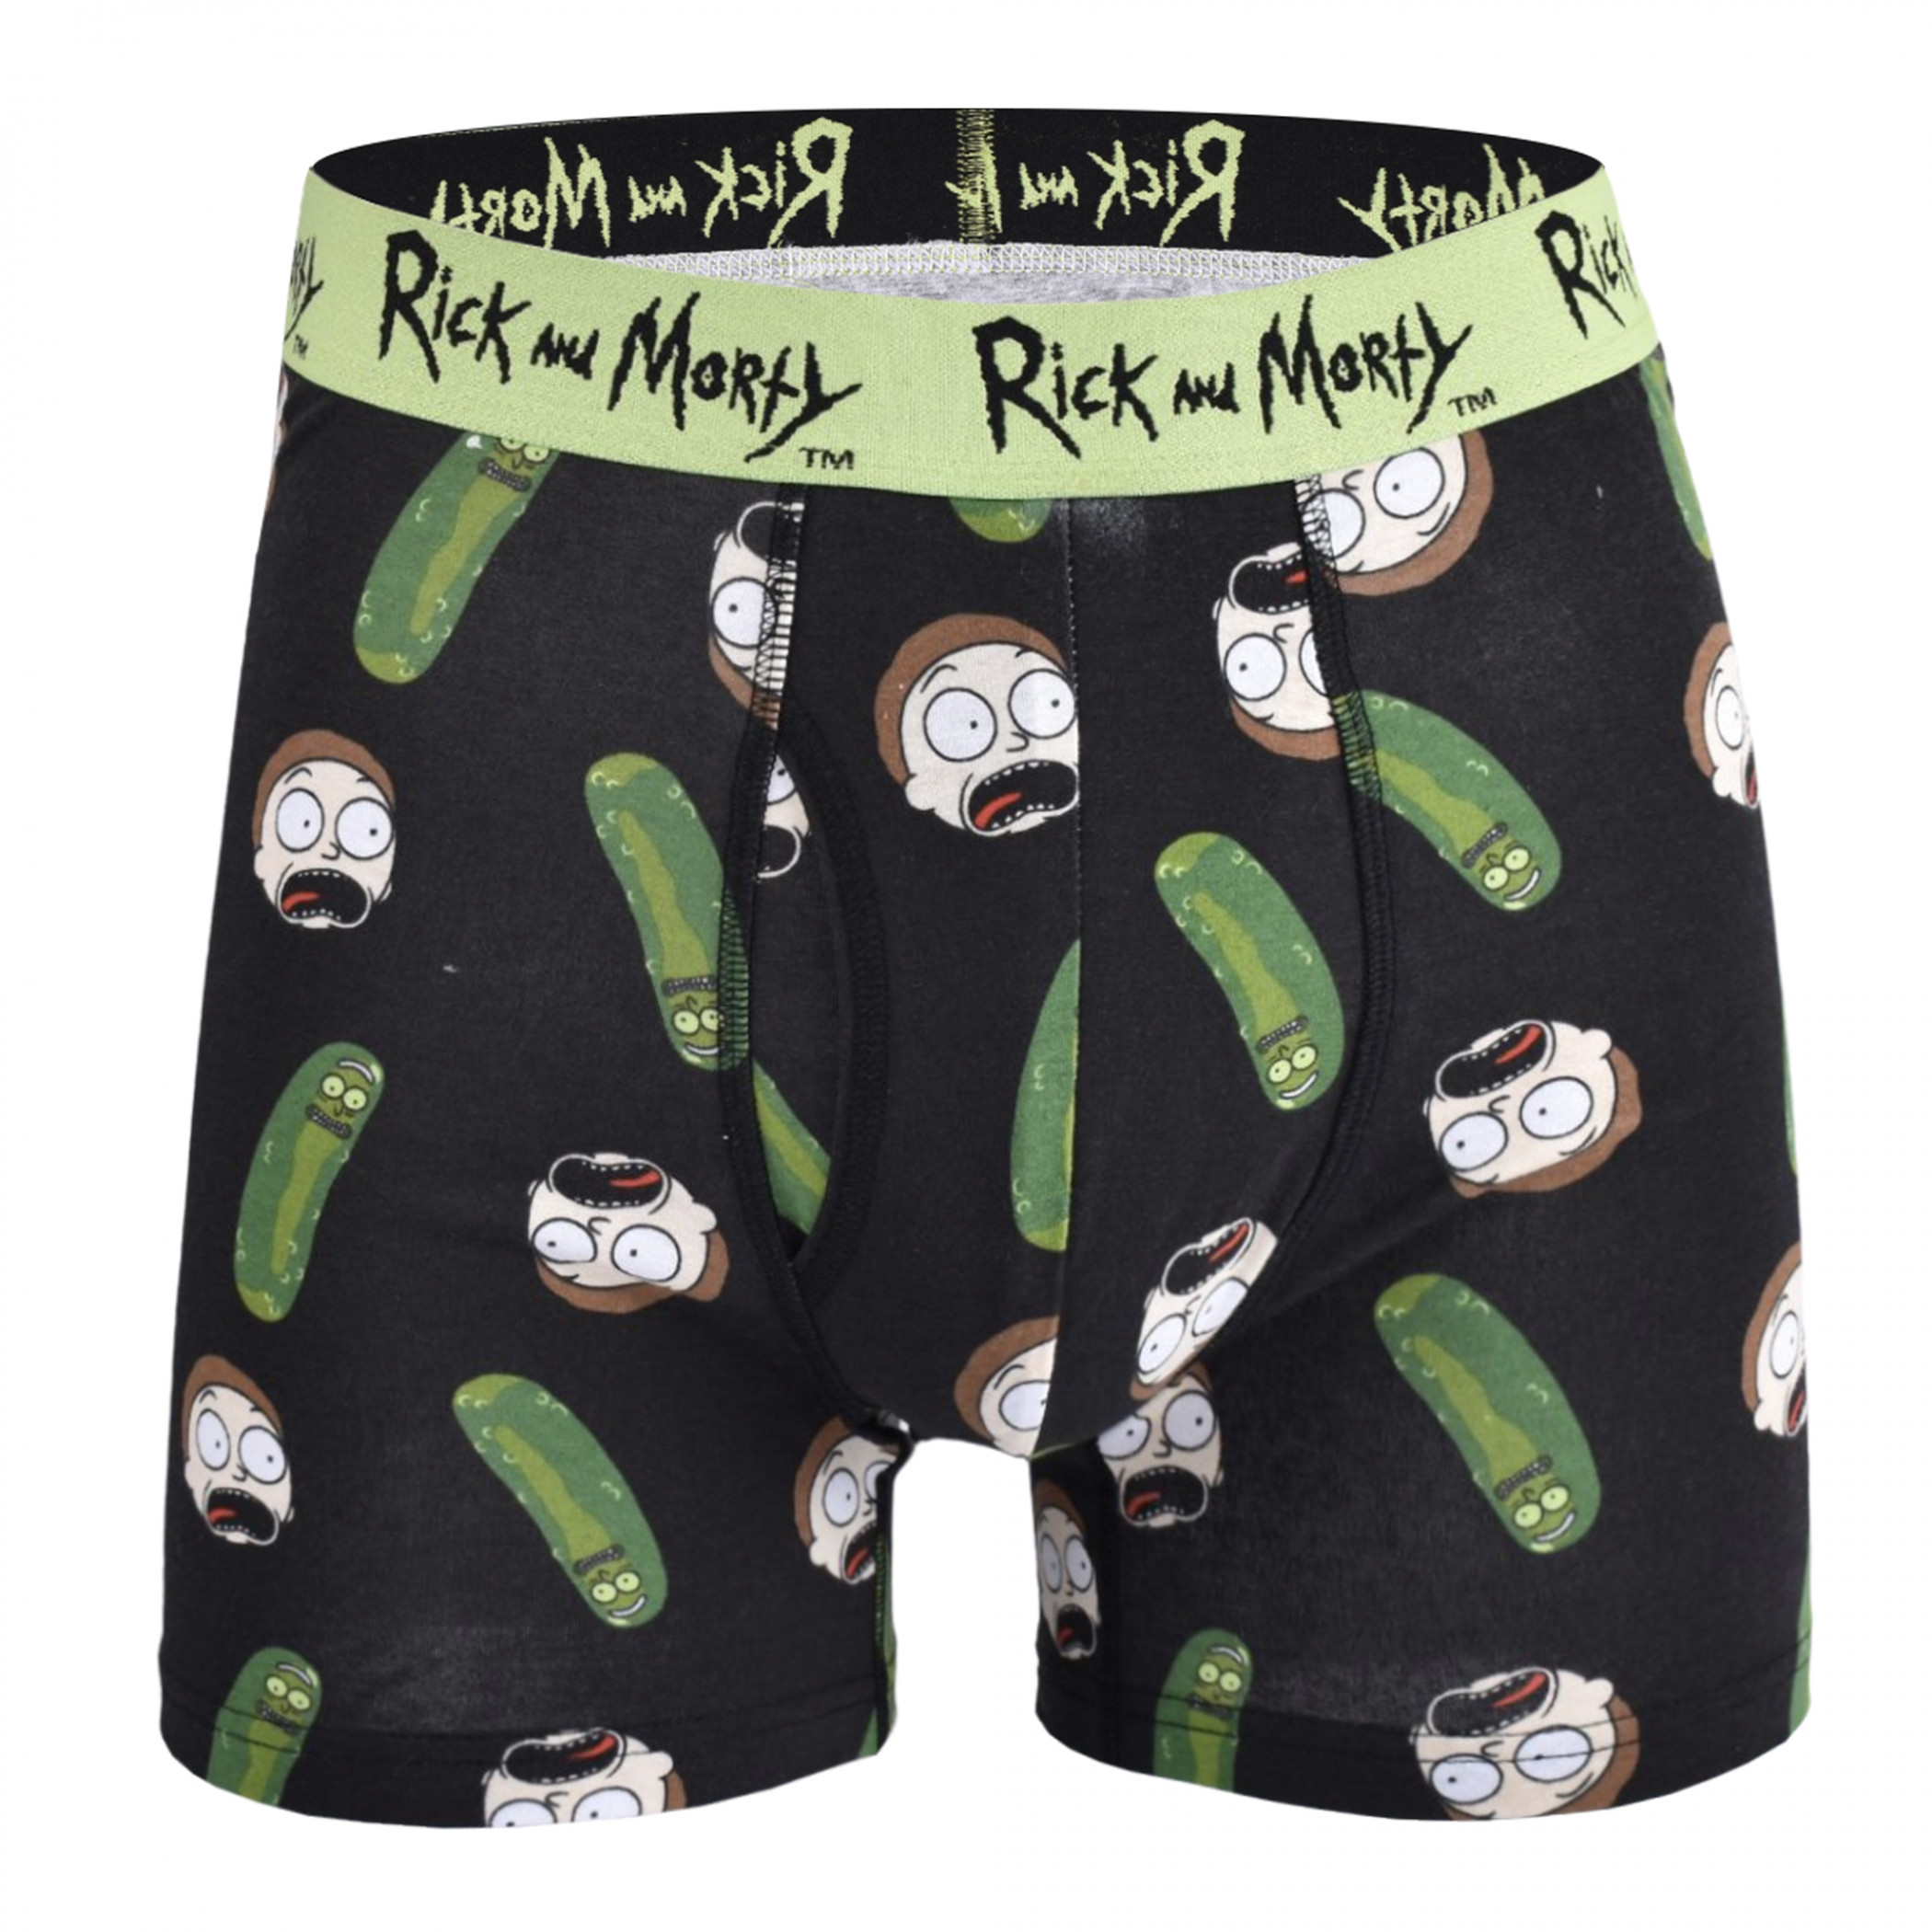 Rick and Morty Pickle Rick Underwear and Crew Socks Boxed Set